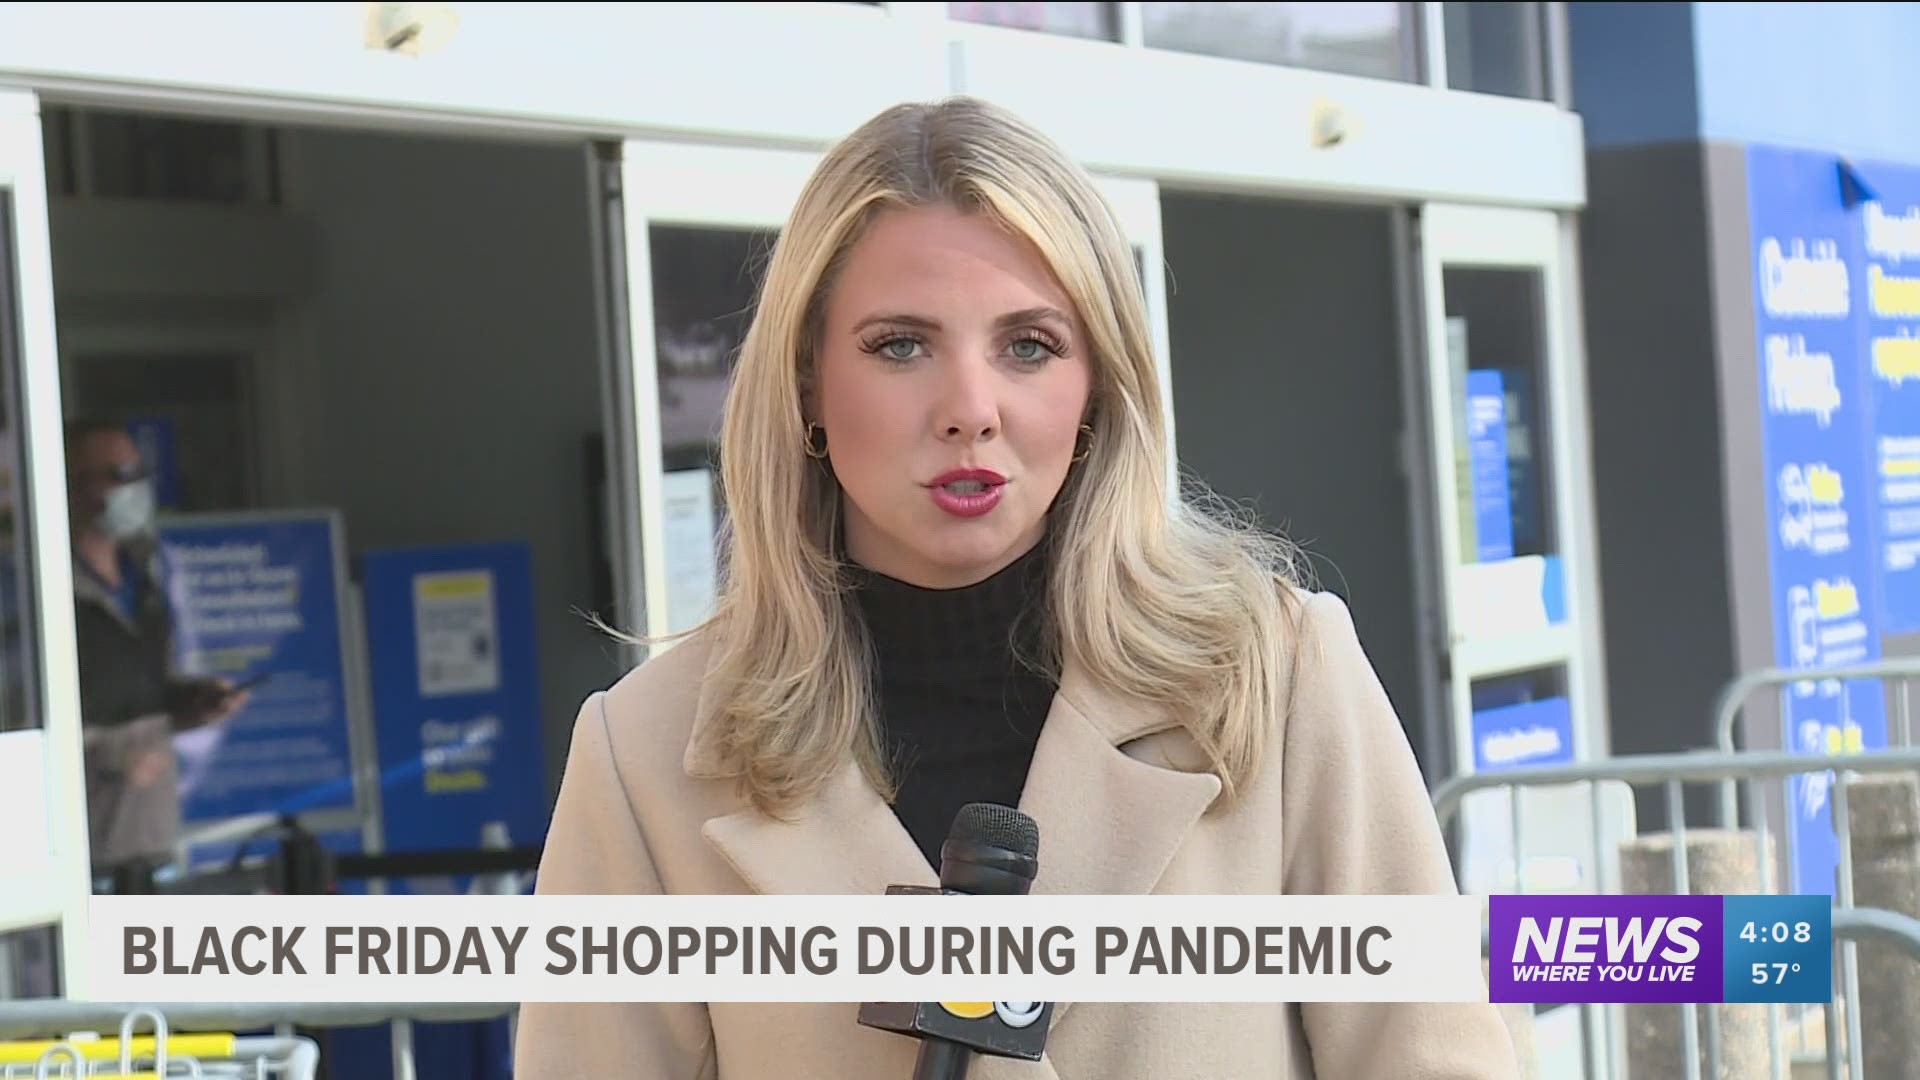 Black Friday shopping looks a little different in Arkansas this year due to the COVID-19 pandemic.